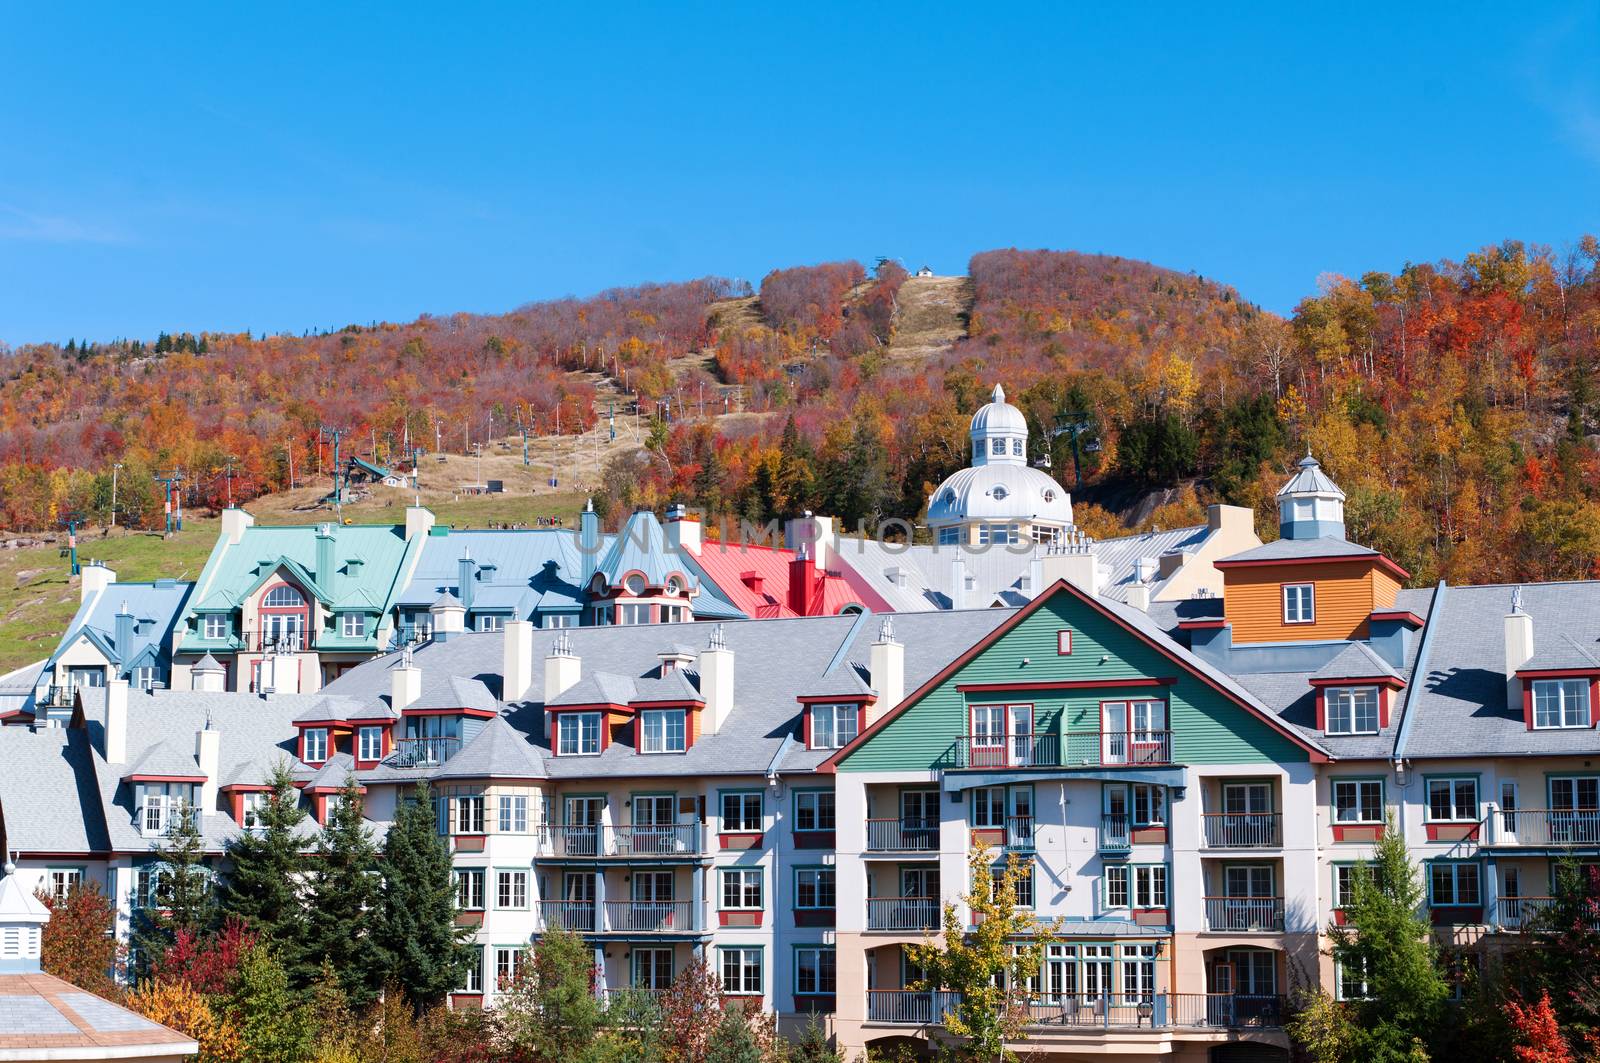 Colorful Hotels in Mont Tremblant, Quebec  by daoleduc